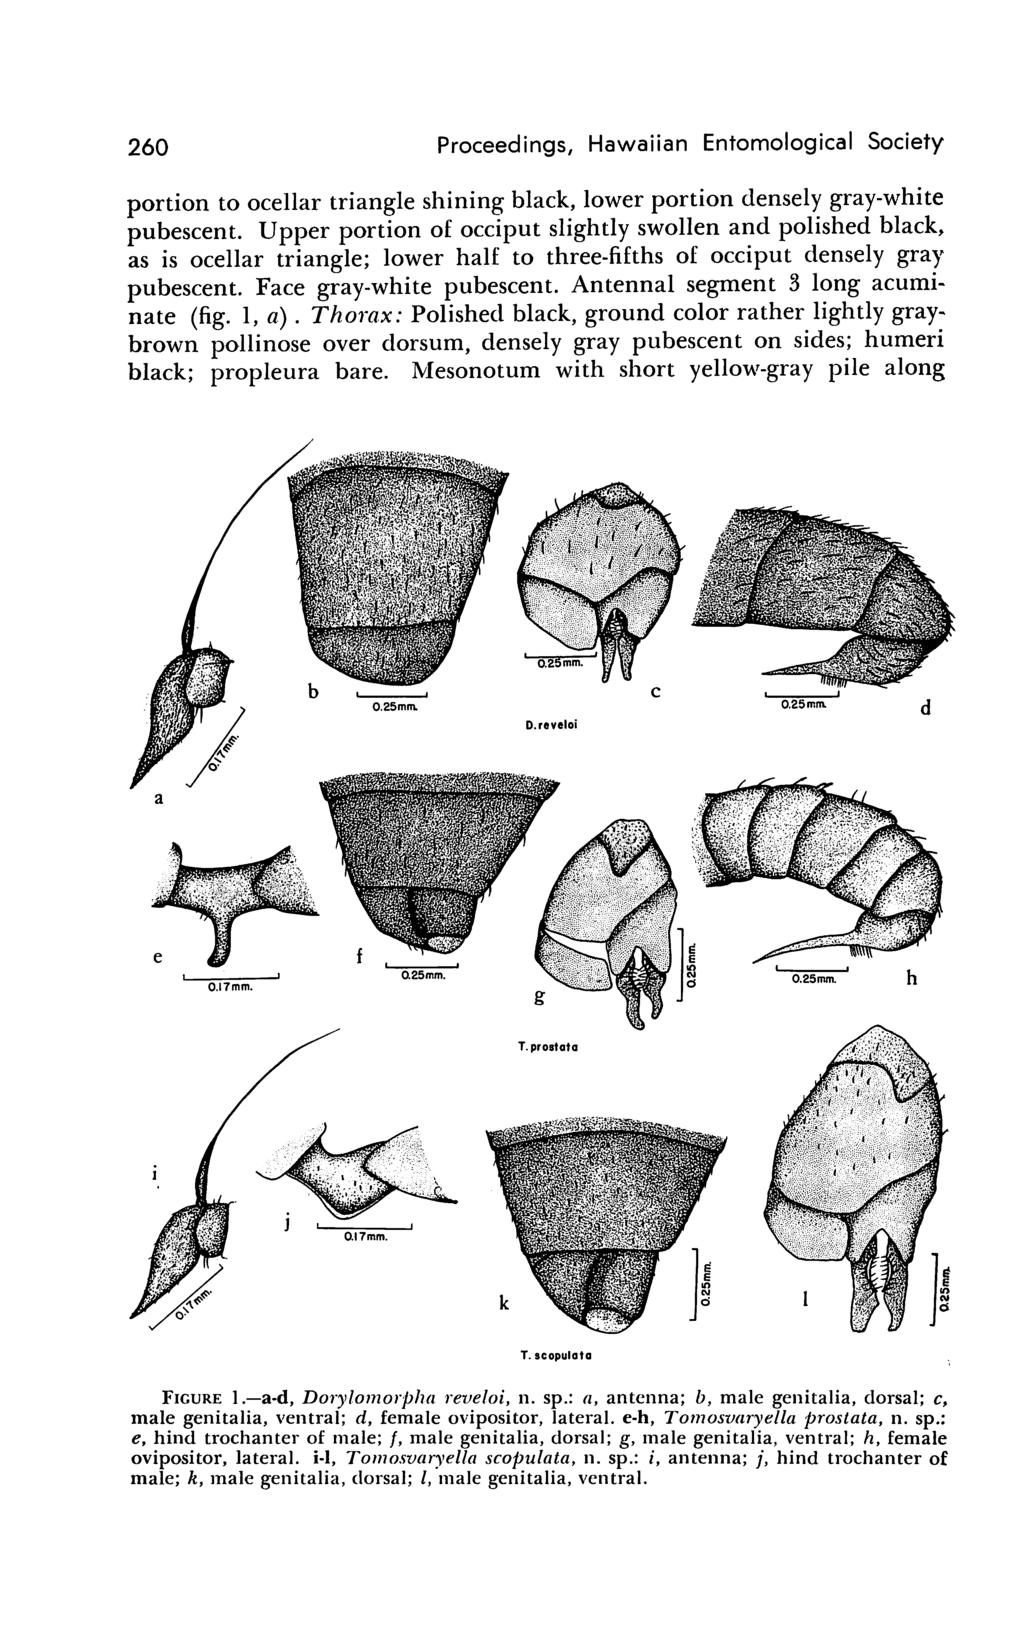 260 Proceedings, Hawaiian Entomological Society portion to ocellar triangle shining black, lower portion densely gray-white pubescent.